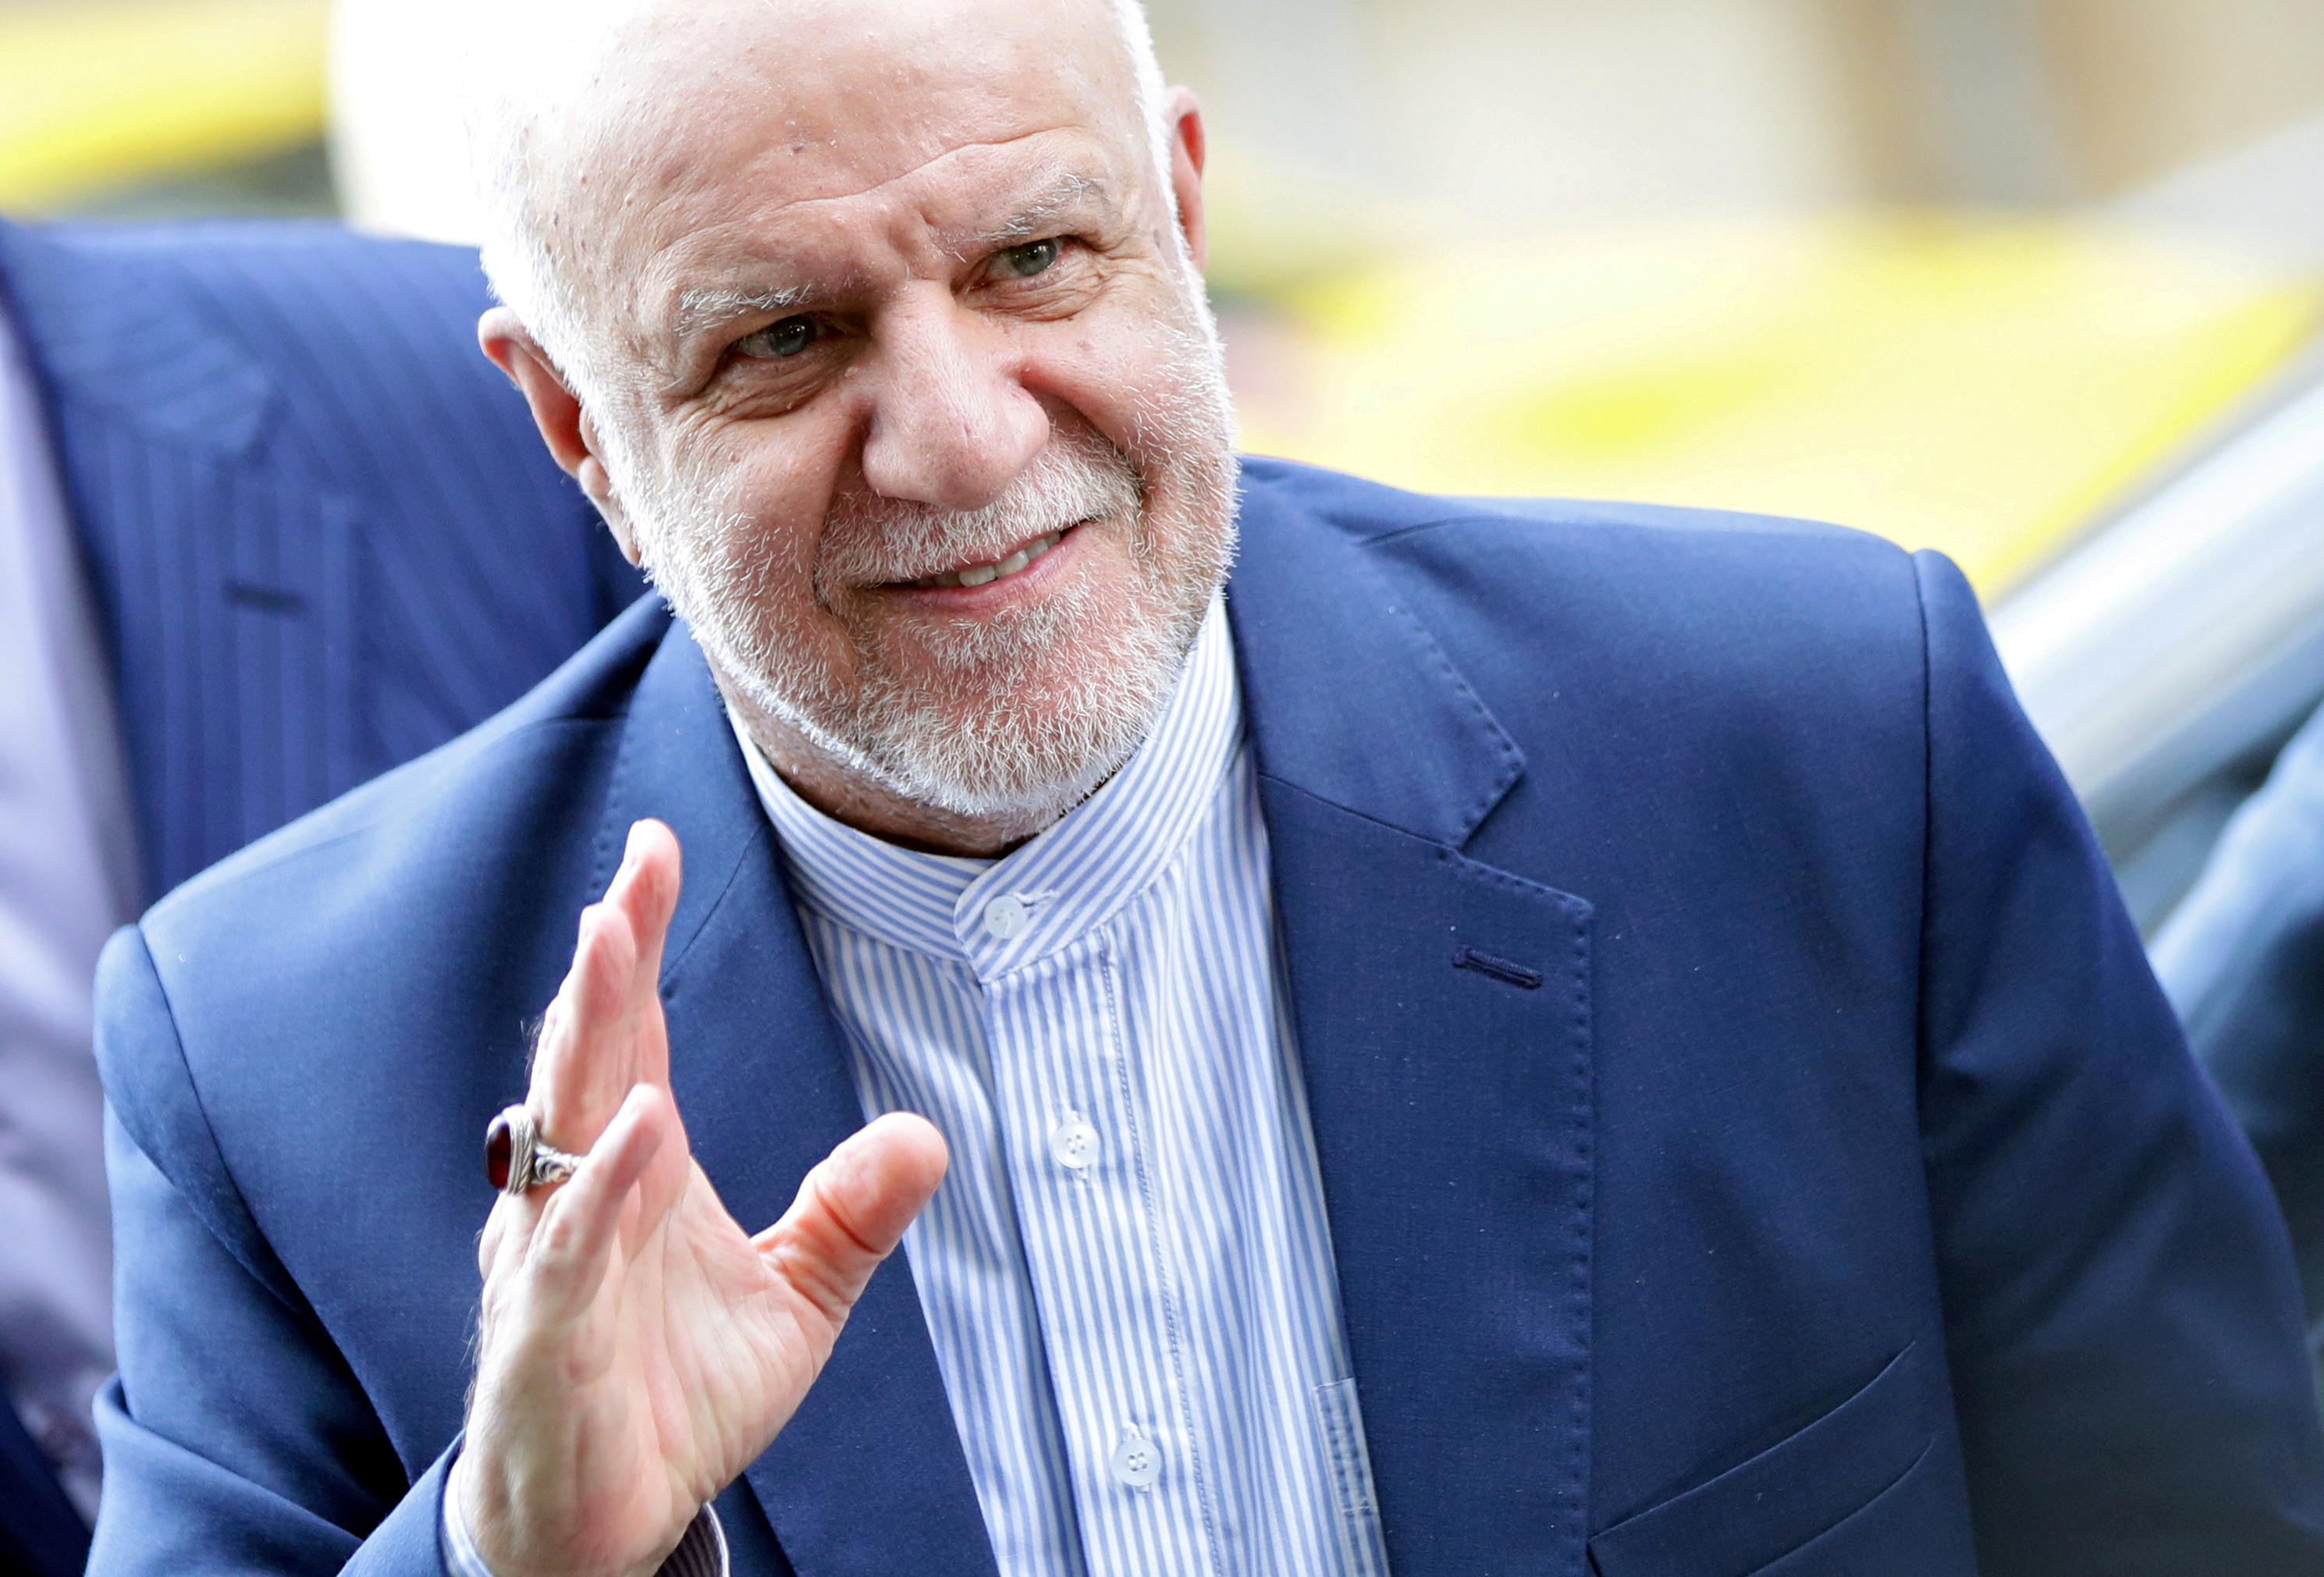 Iran's Oil Minister Bijan Zanganeh arrives for an OPEC and NON-OPEC meeting in Vienna